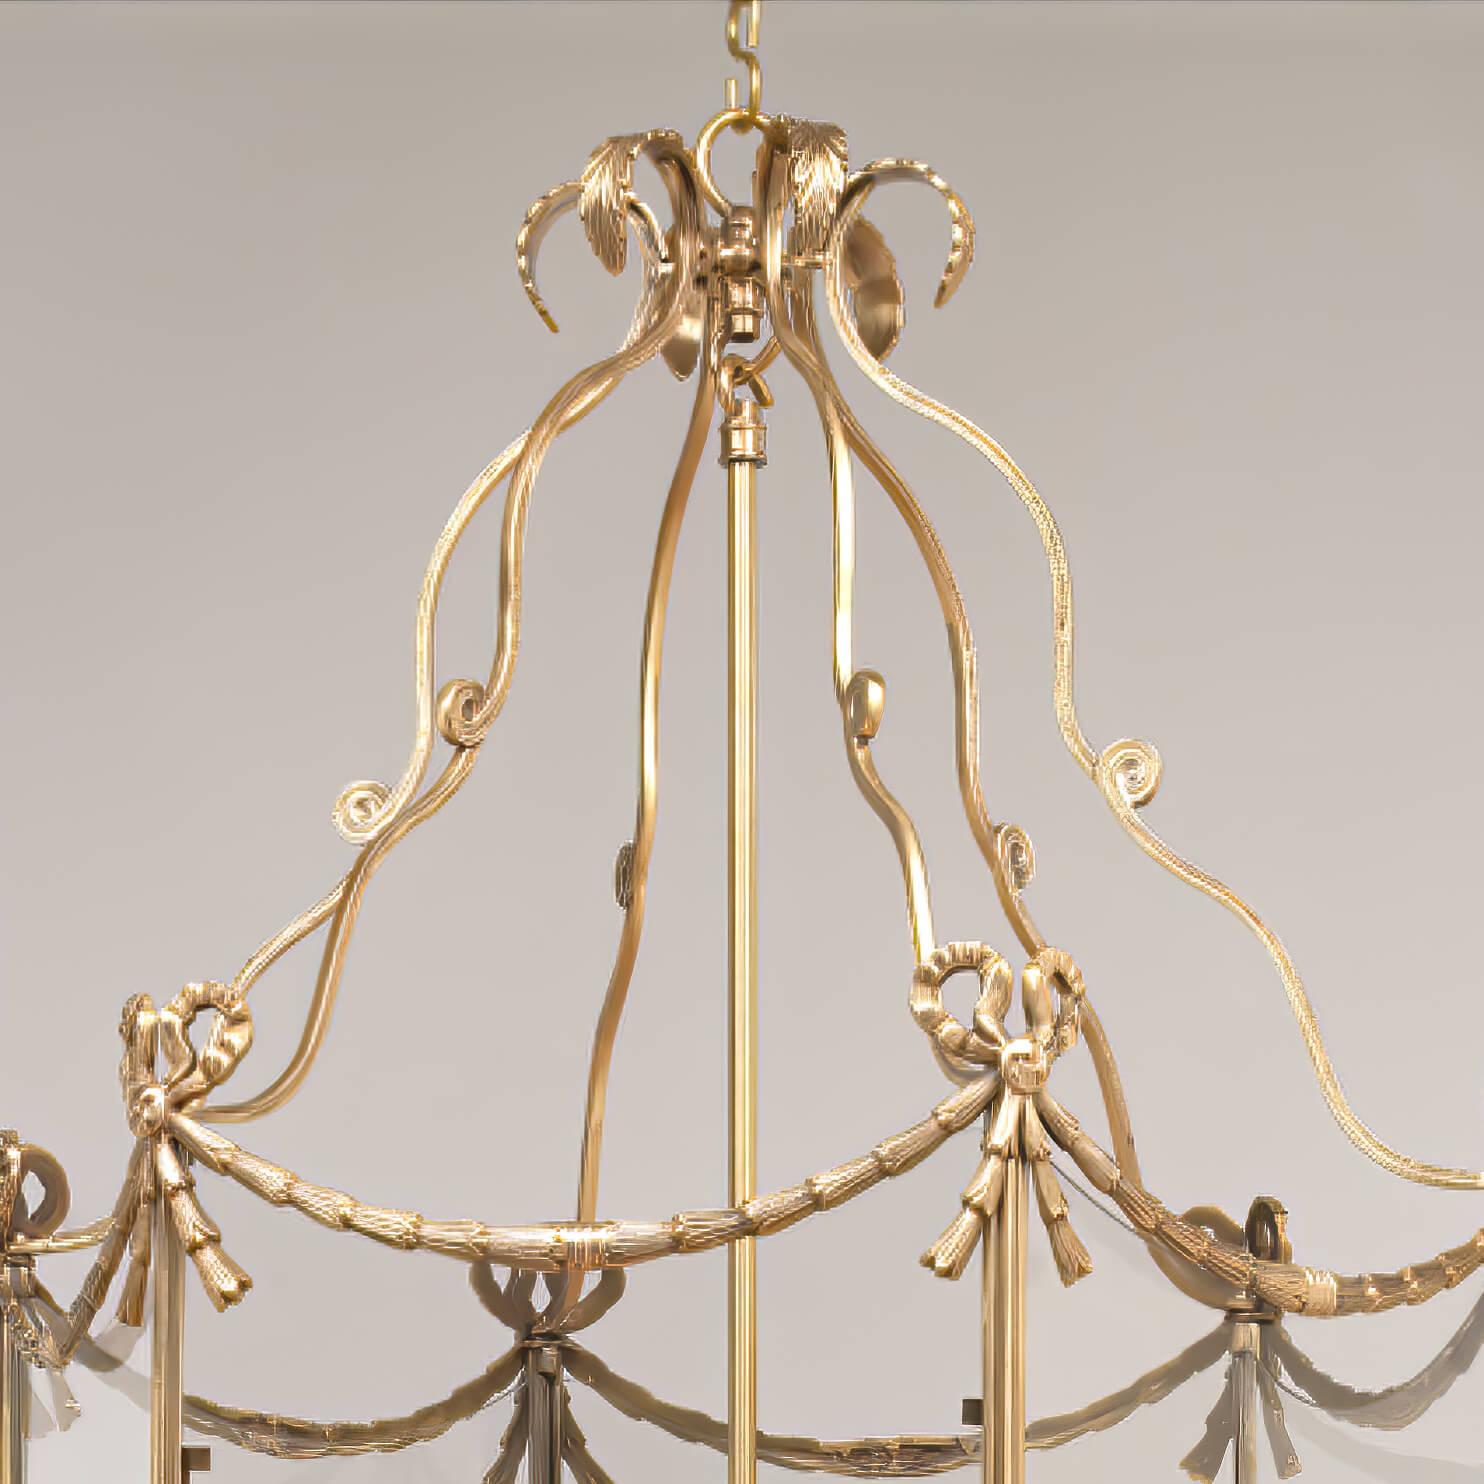 The large Swedish neoclassic style five-light brass hall lantern with 18th century style embellishments. The leaf tip crown above scrolling supports and a hexagonal frame decorated with bowknots, tassels, and bellflower swags. The base decorated